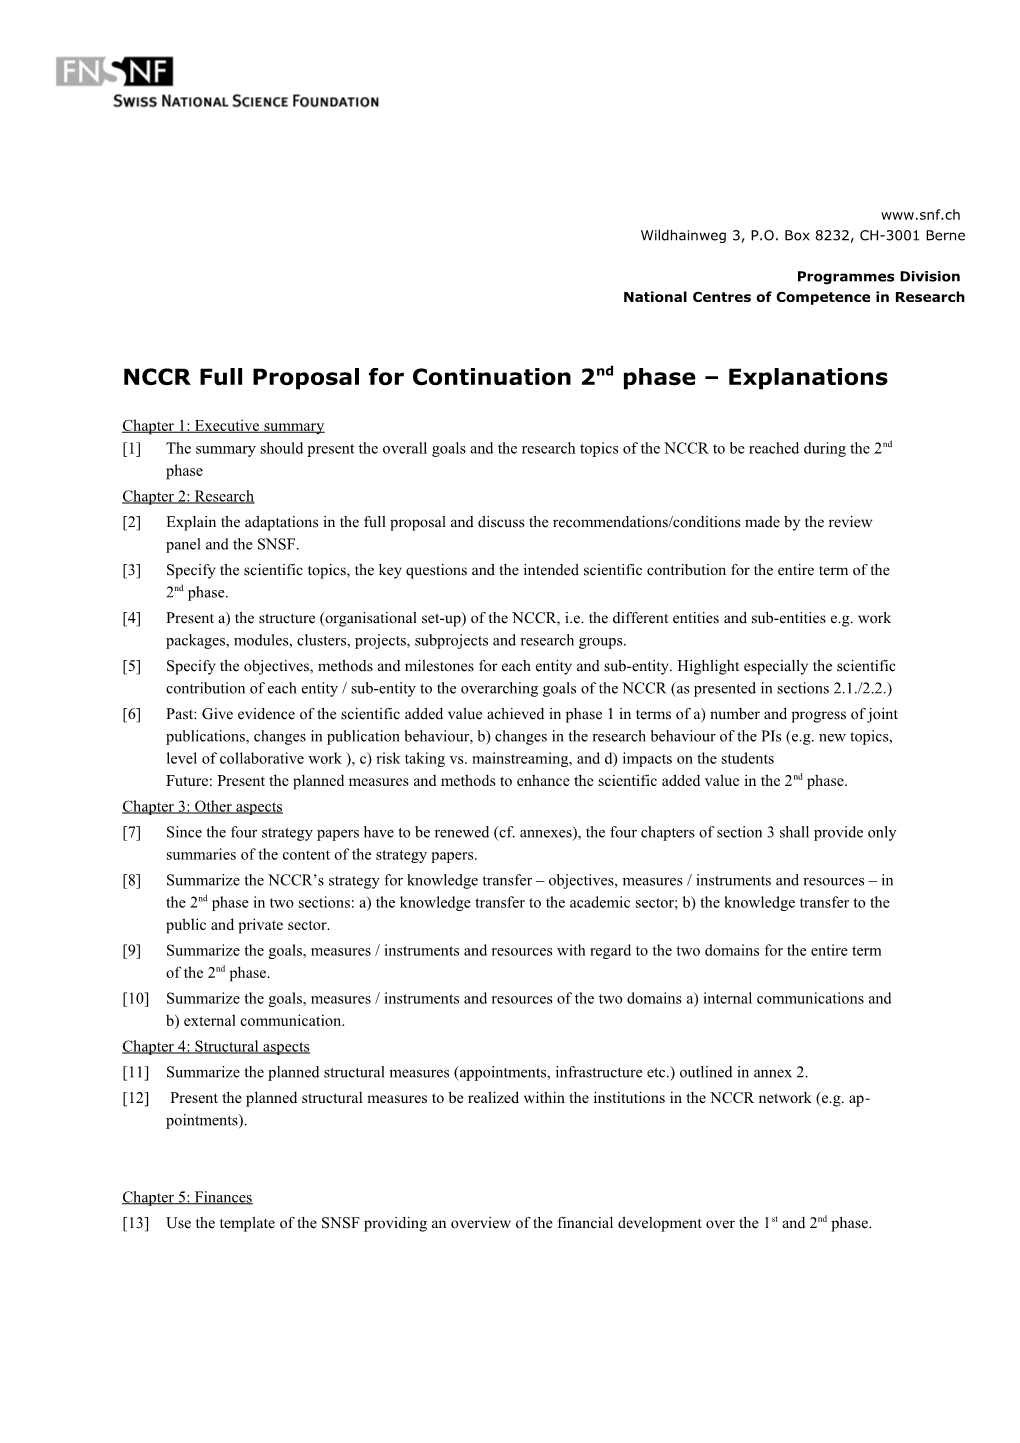 NCCR Coversheet Full Proposal Explanations Serie 3 and 2